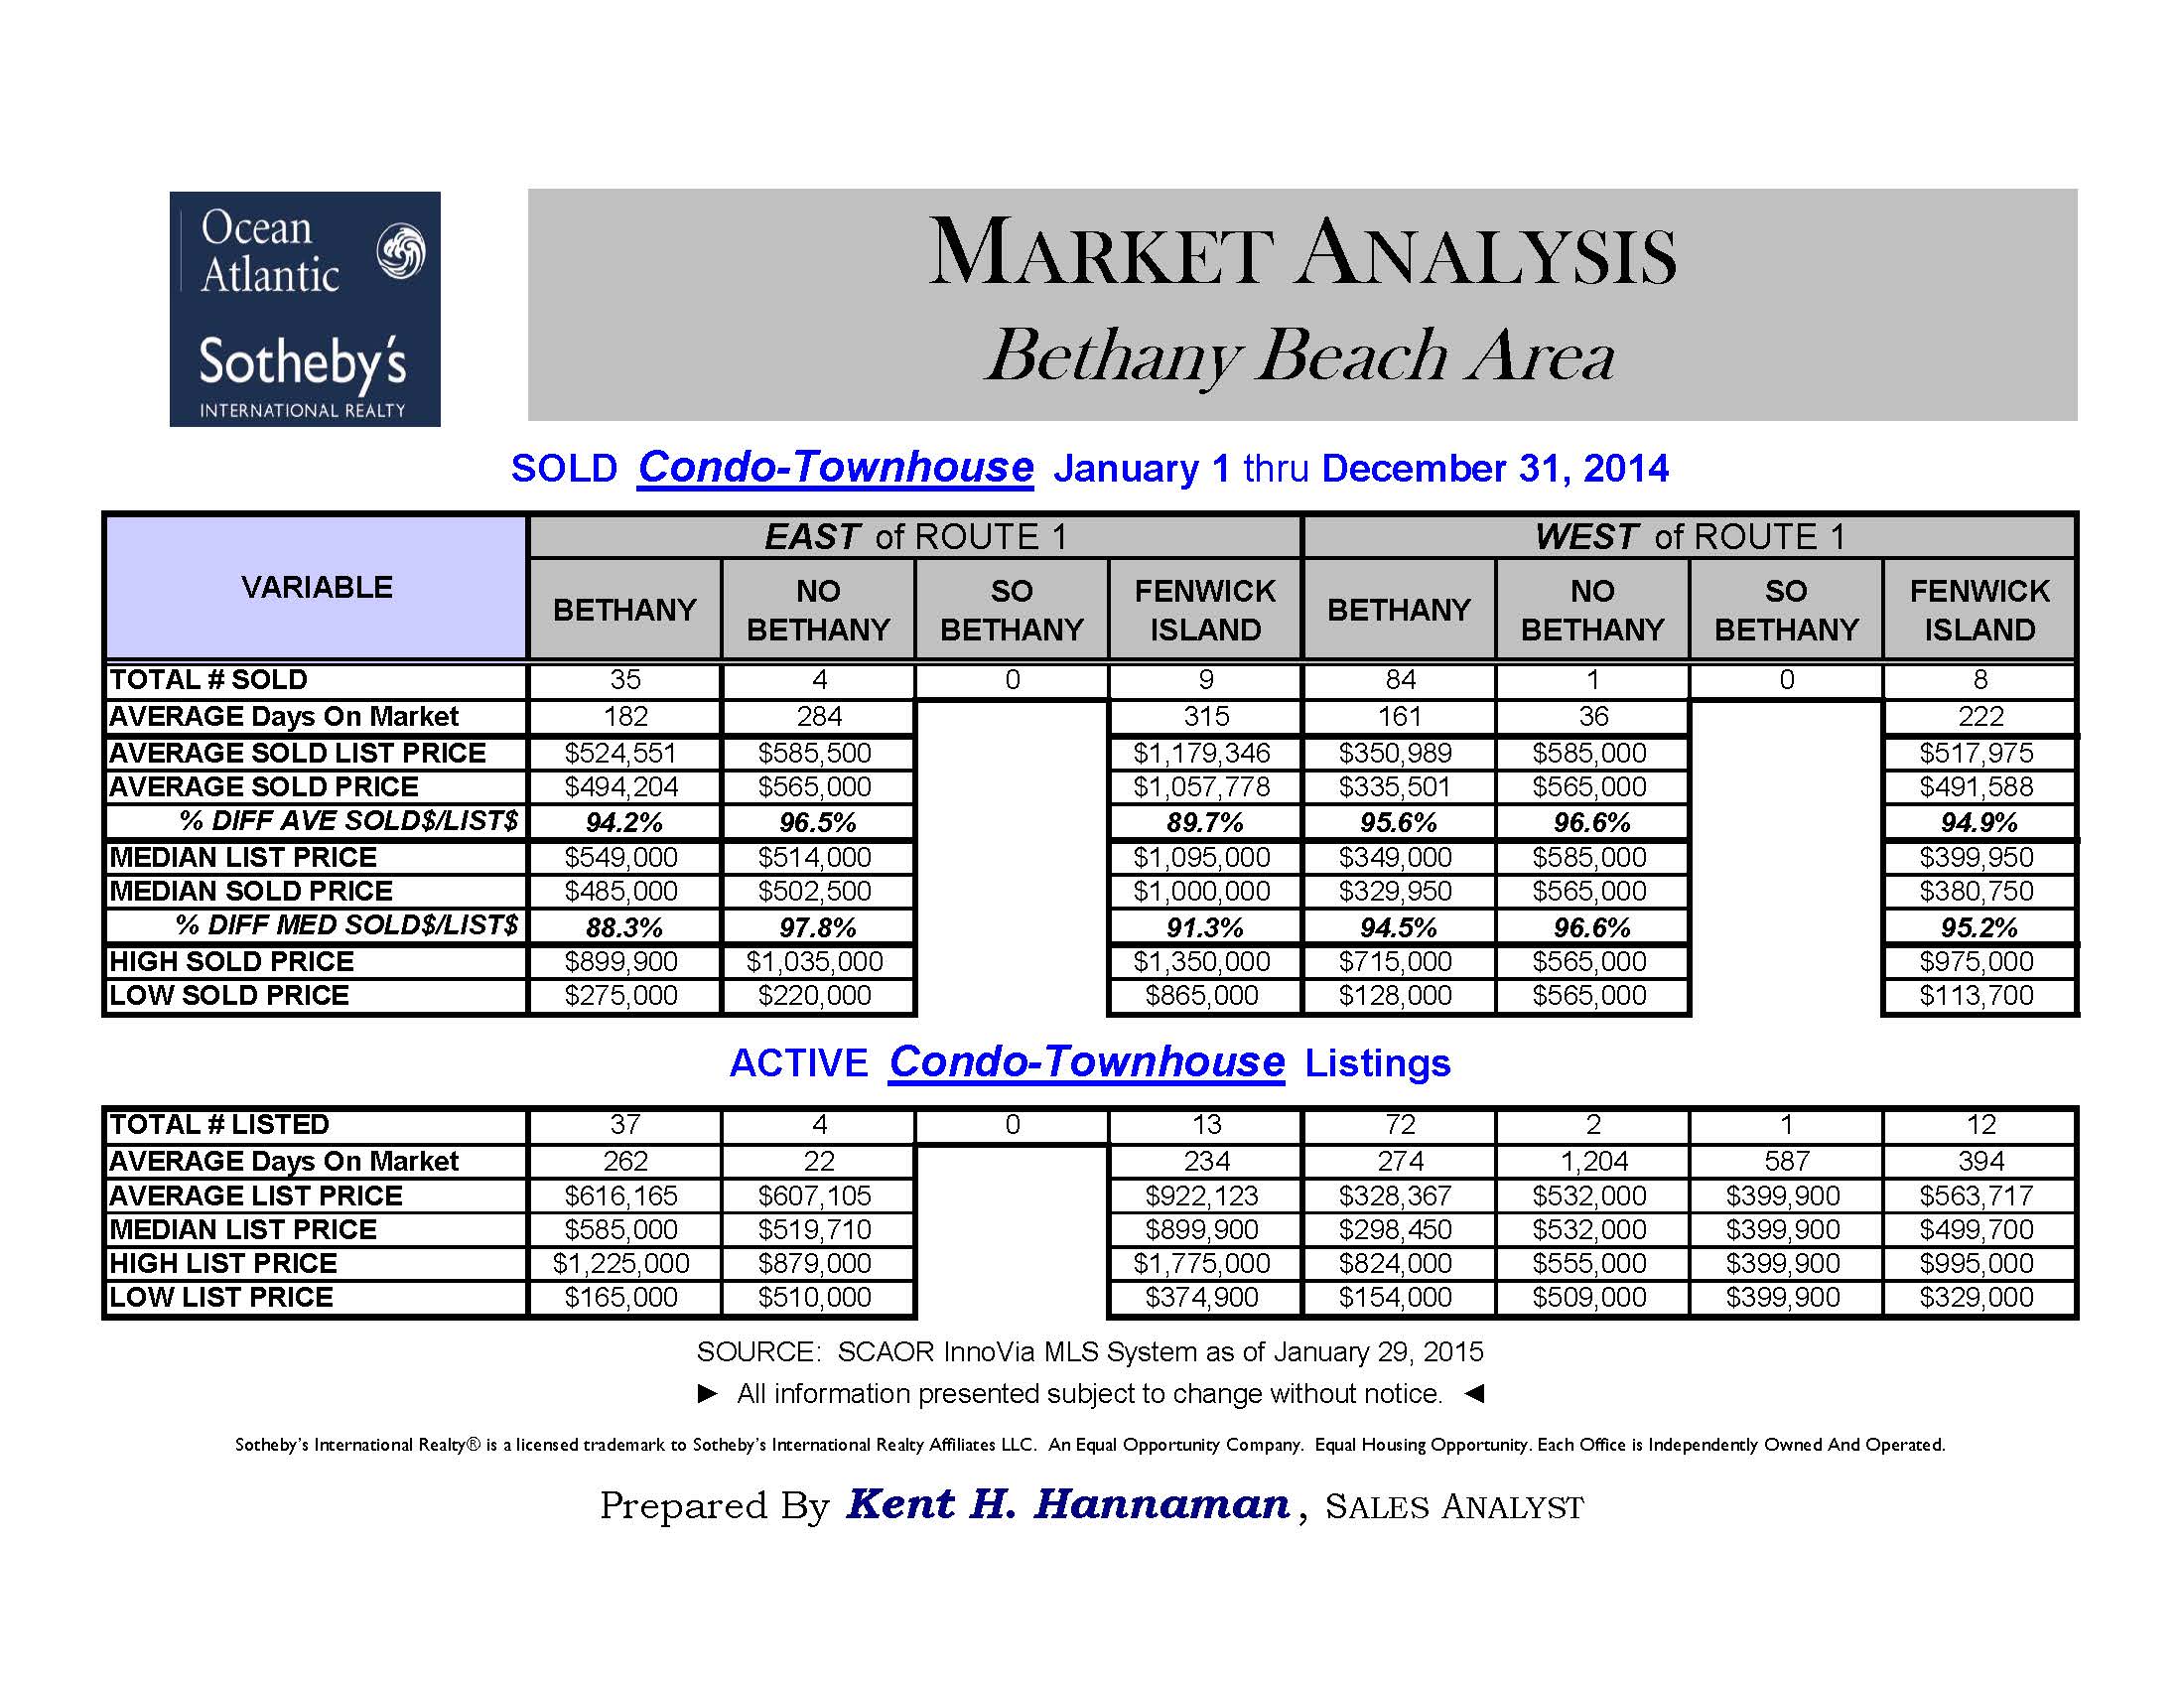 MARKET ANALYSIS - Condominiums and Townhomes in Bethany Beach Area